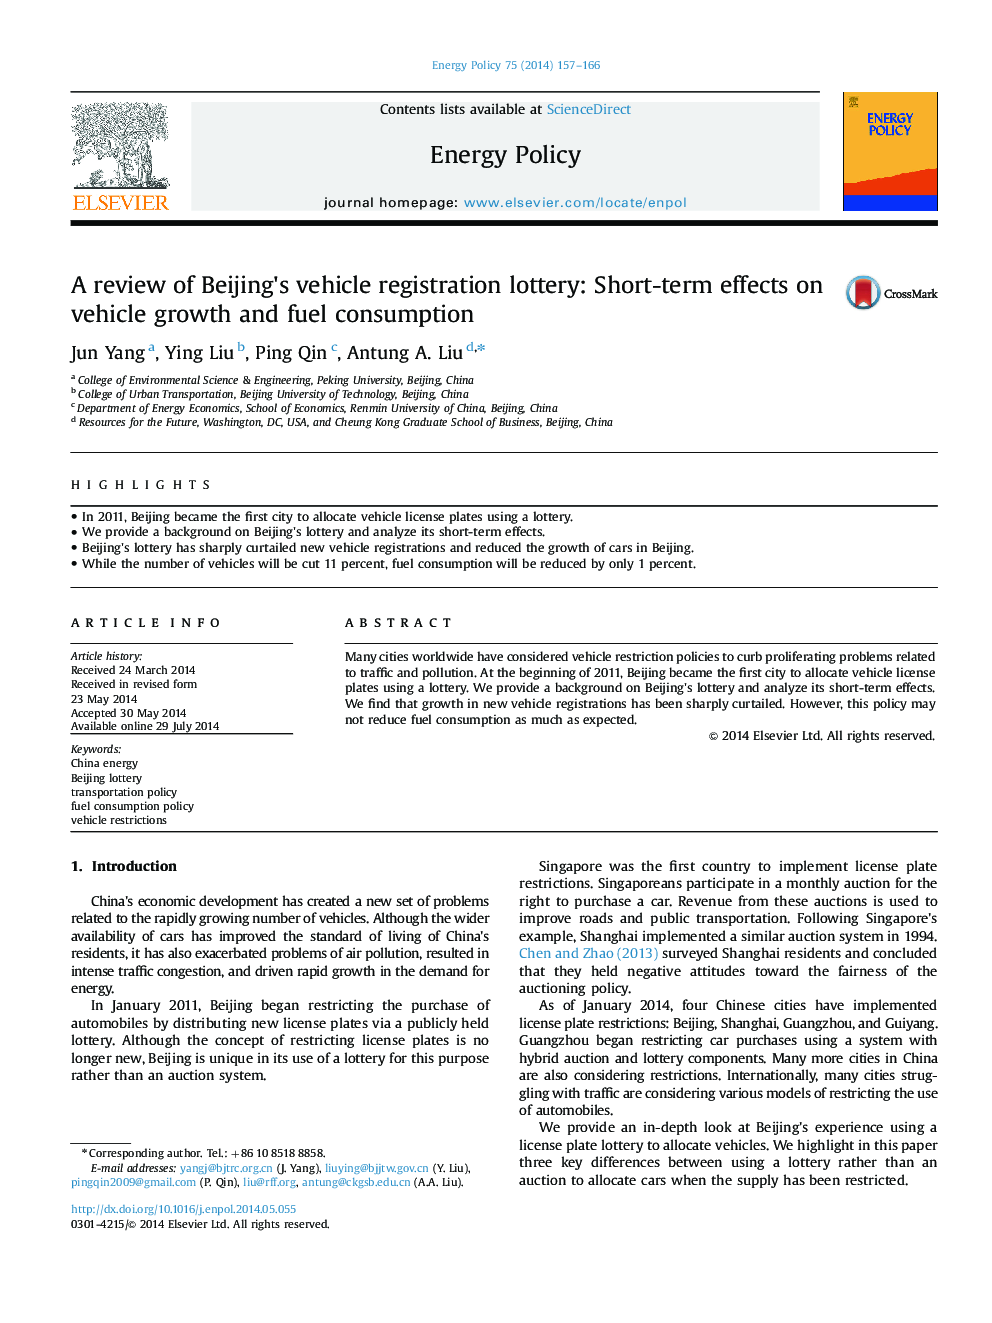 A review of Beijing×³s vehicle registration lottery: Short-term effects on vehicle growth and fuel consumption